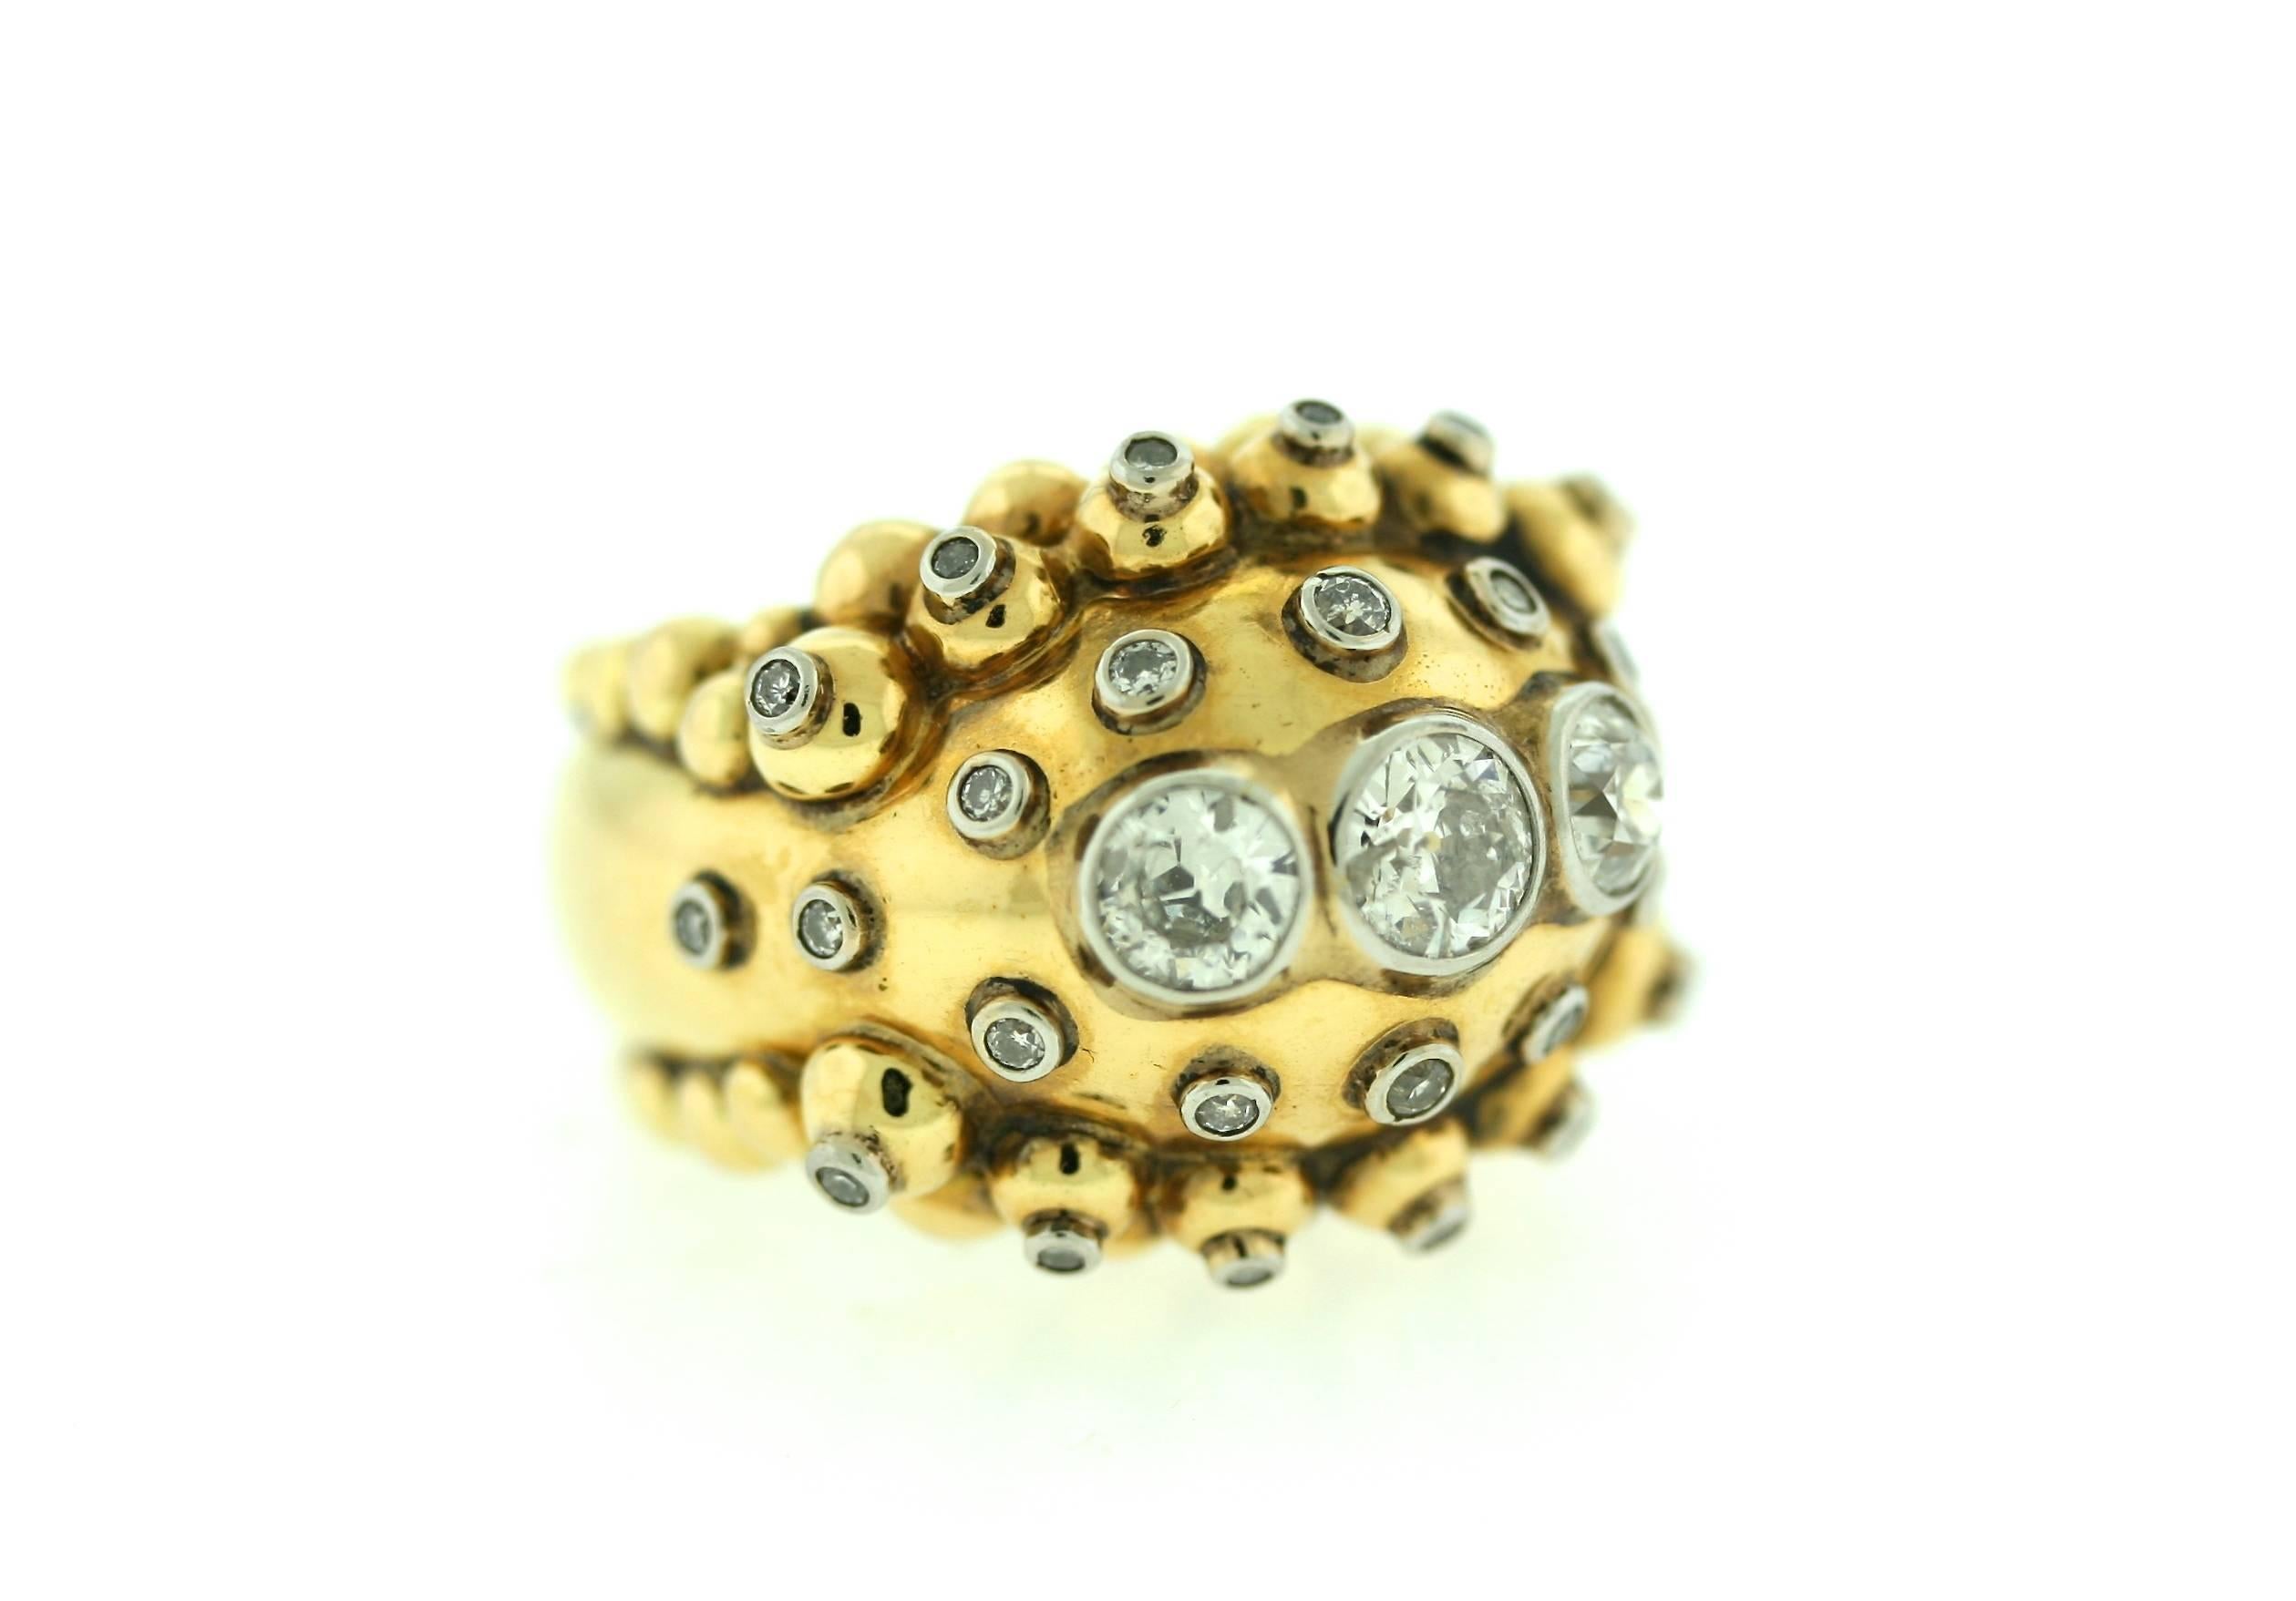 Stylish French 18k gold ring designed in a bombe stye with thee center stones totaling approximately 1.25 carats set in platinum surrounded by 12 raised diamond centered balls and 14 bezel set diamonds. Size 6.5-7. French hallmarks present.